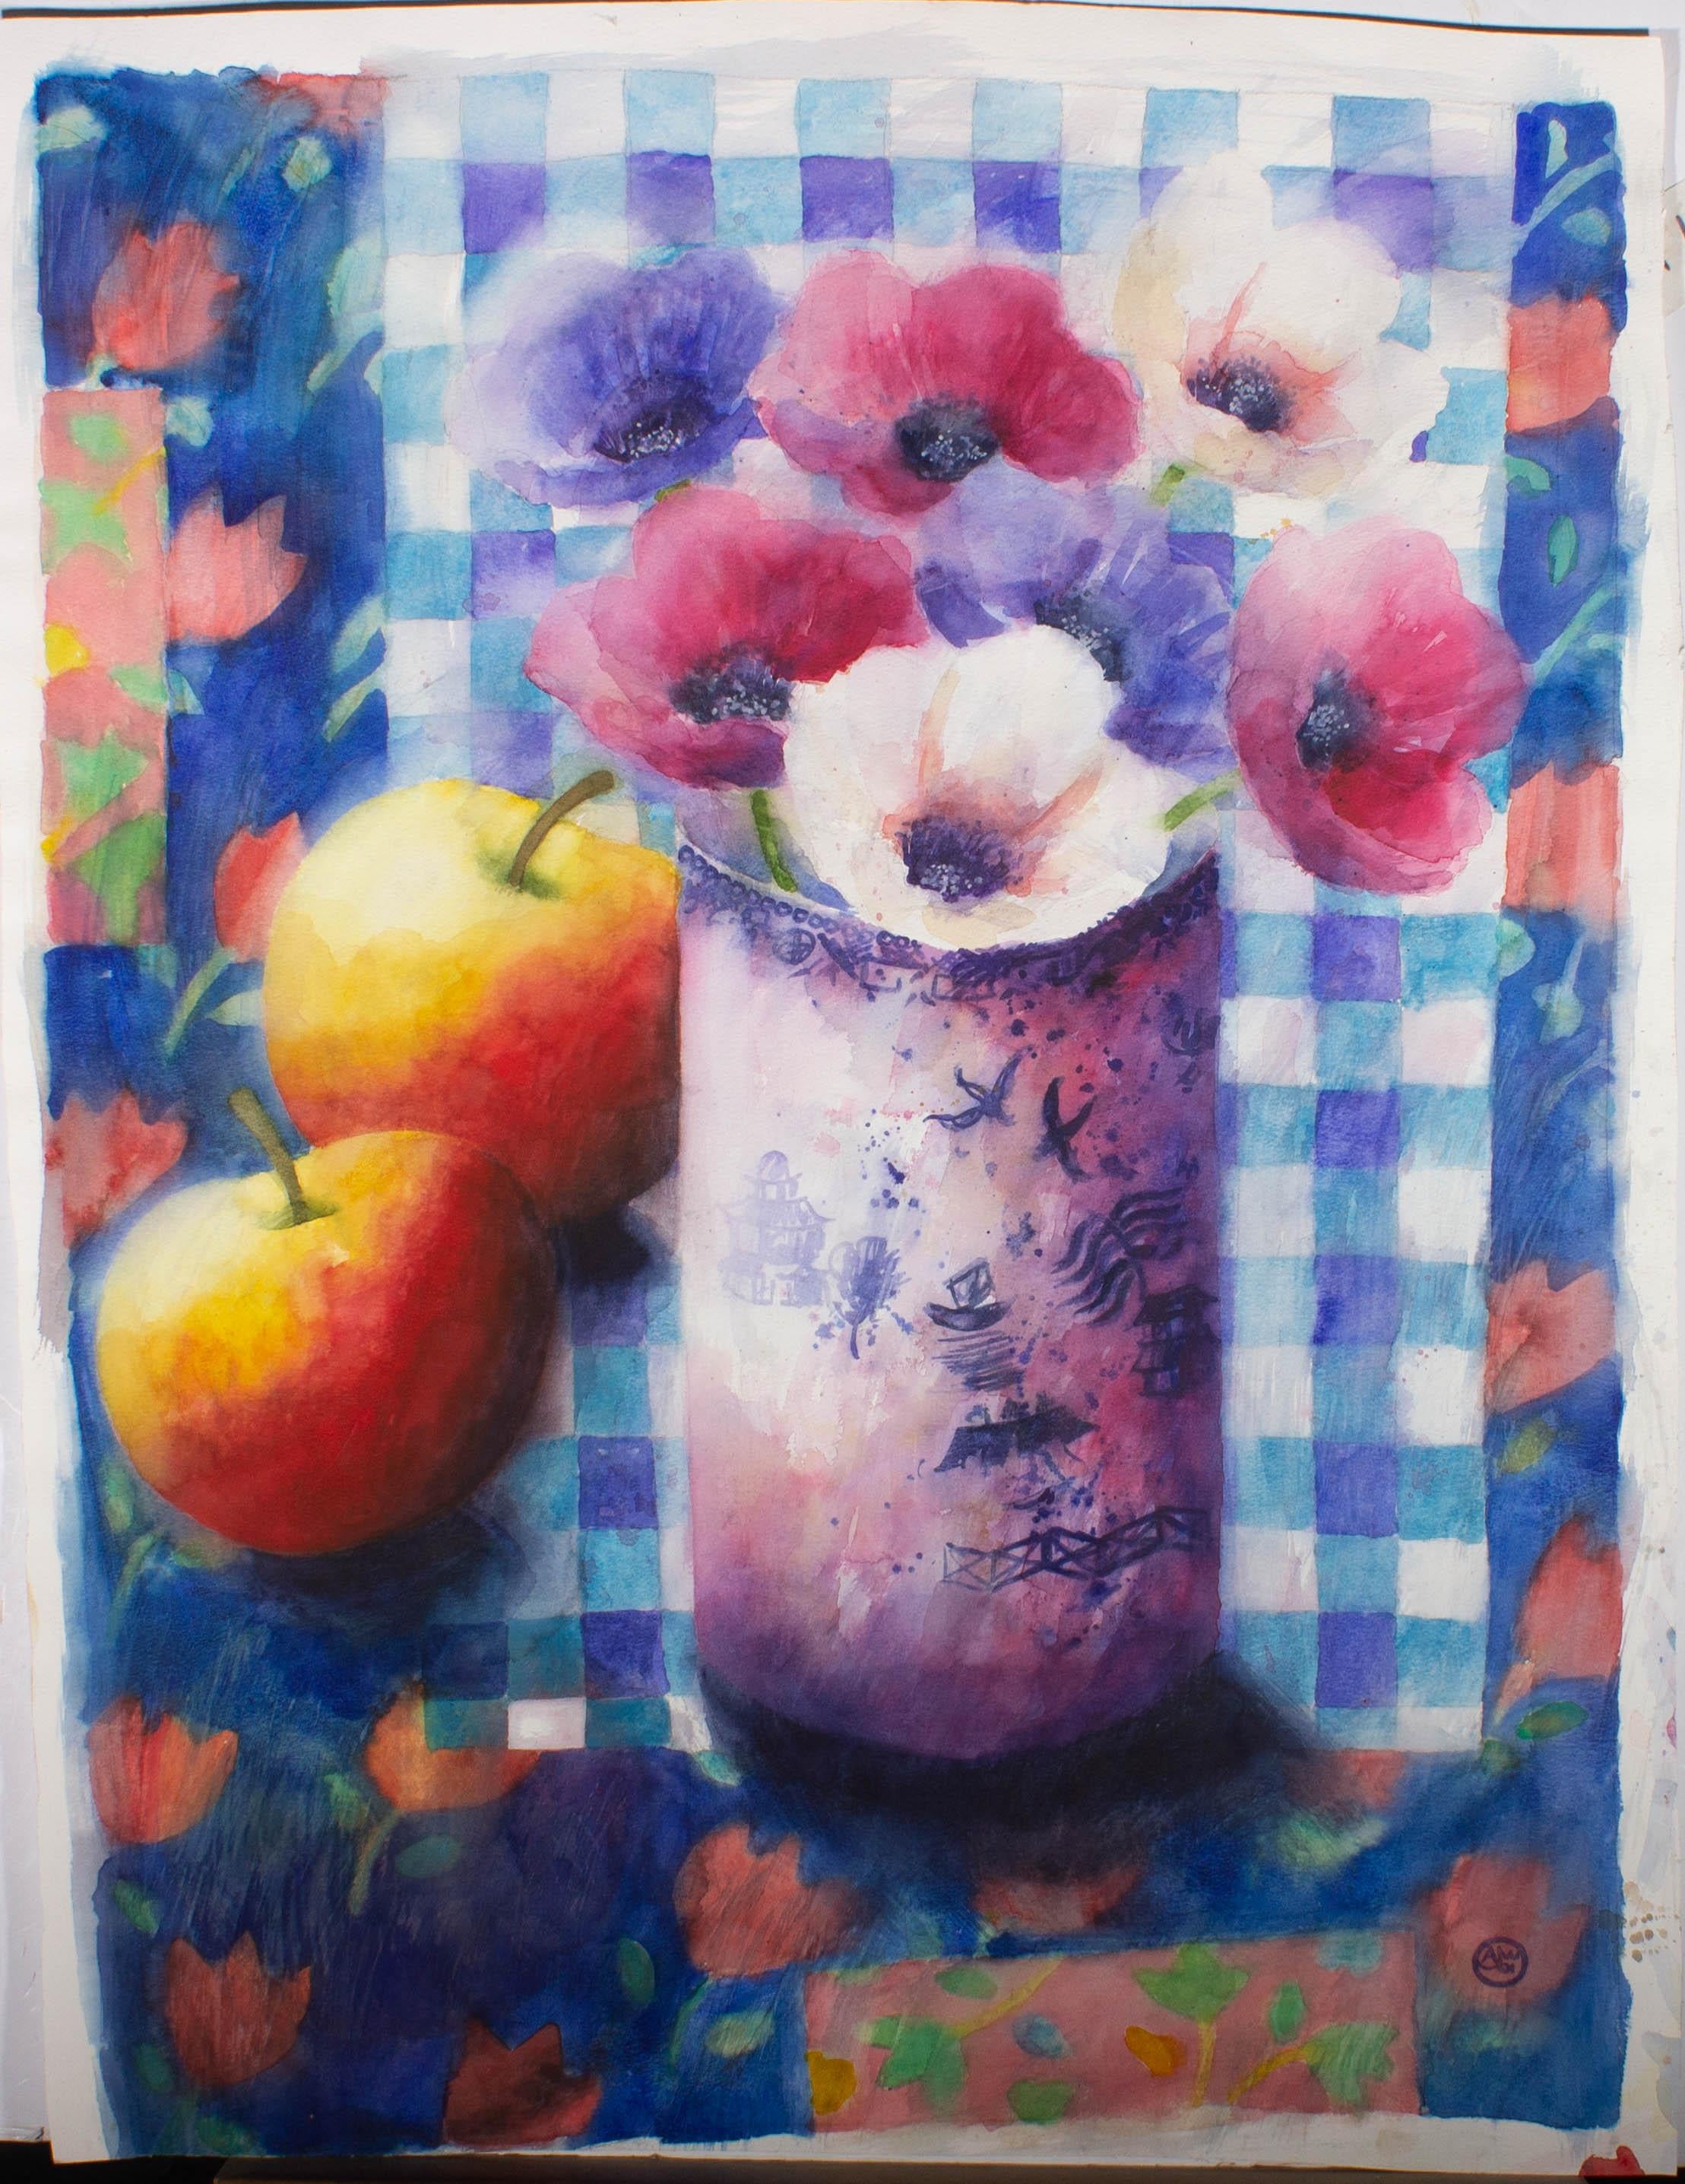 A.J.W - 2001 Watercolour, Anemones And Apples 2